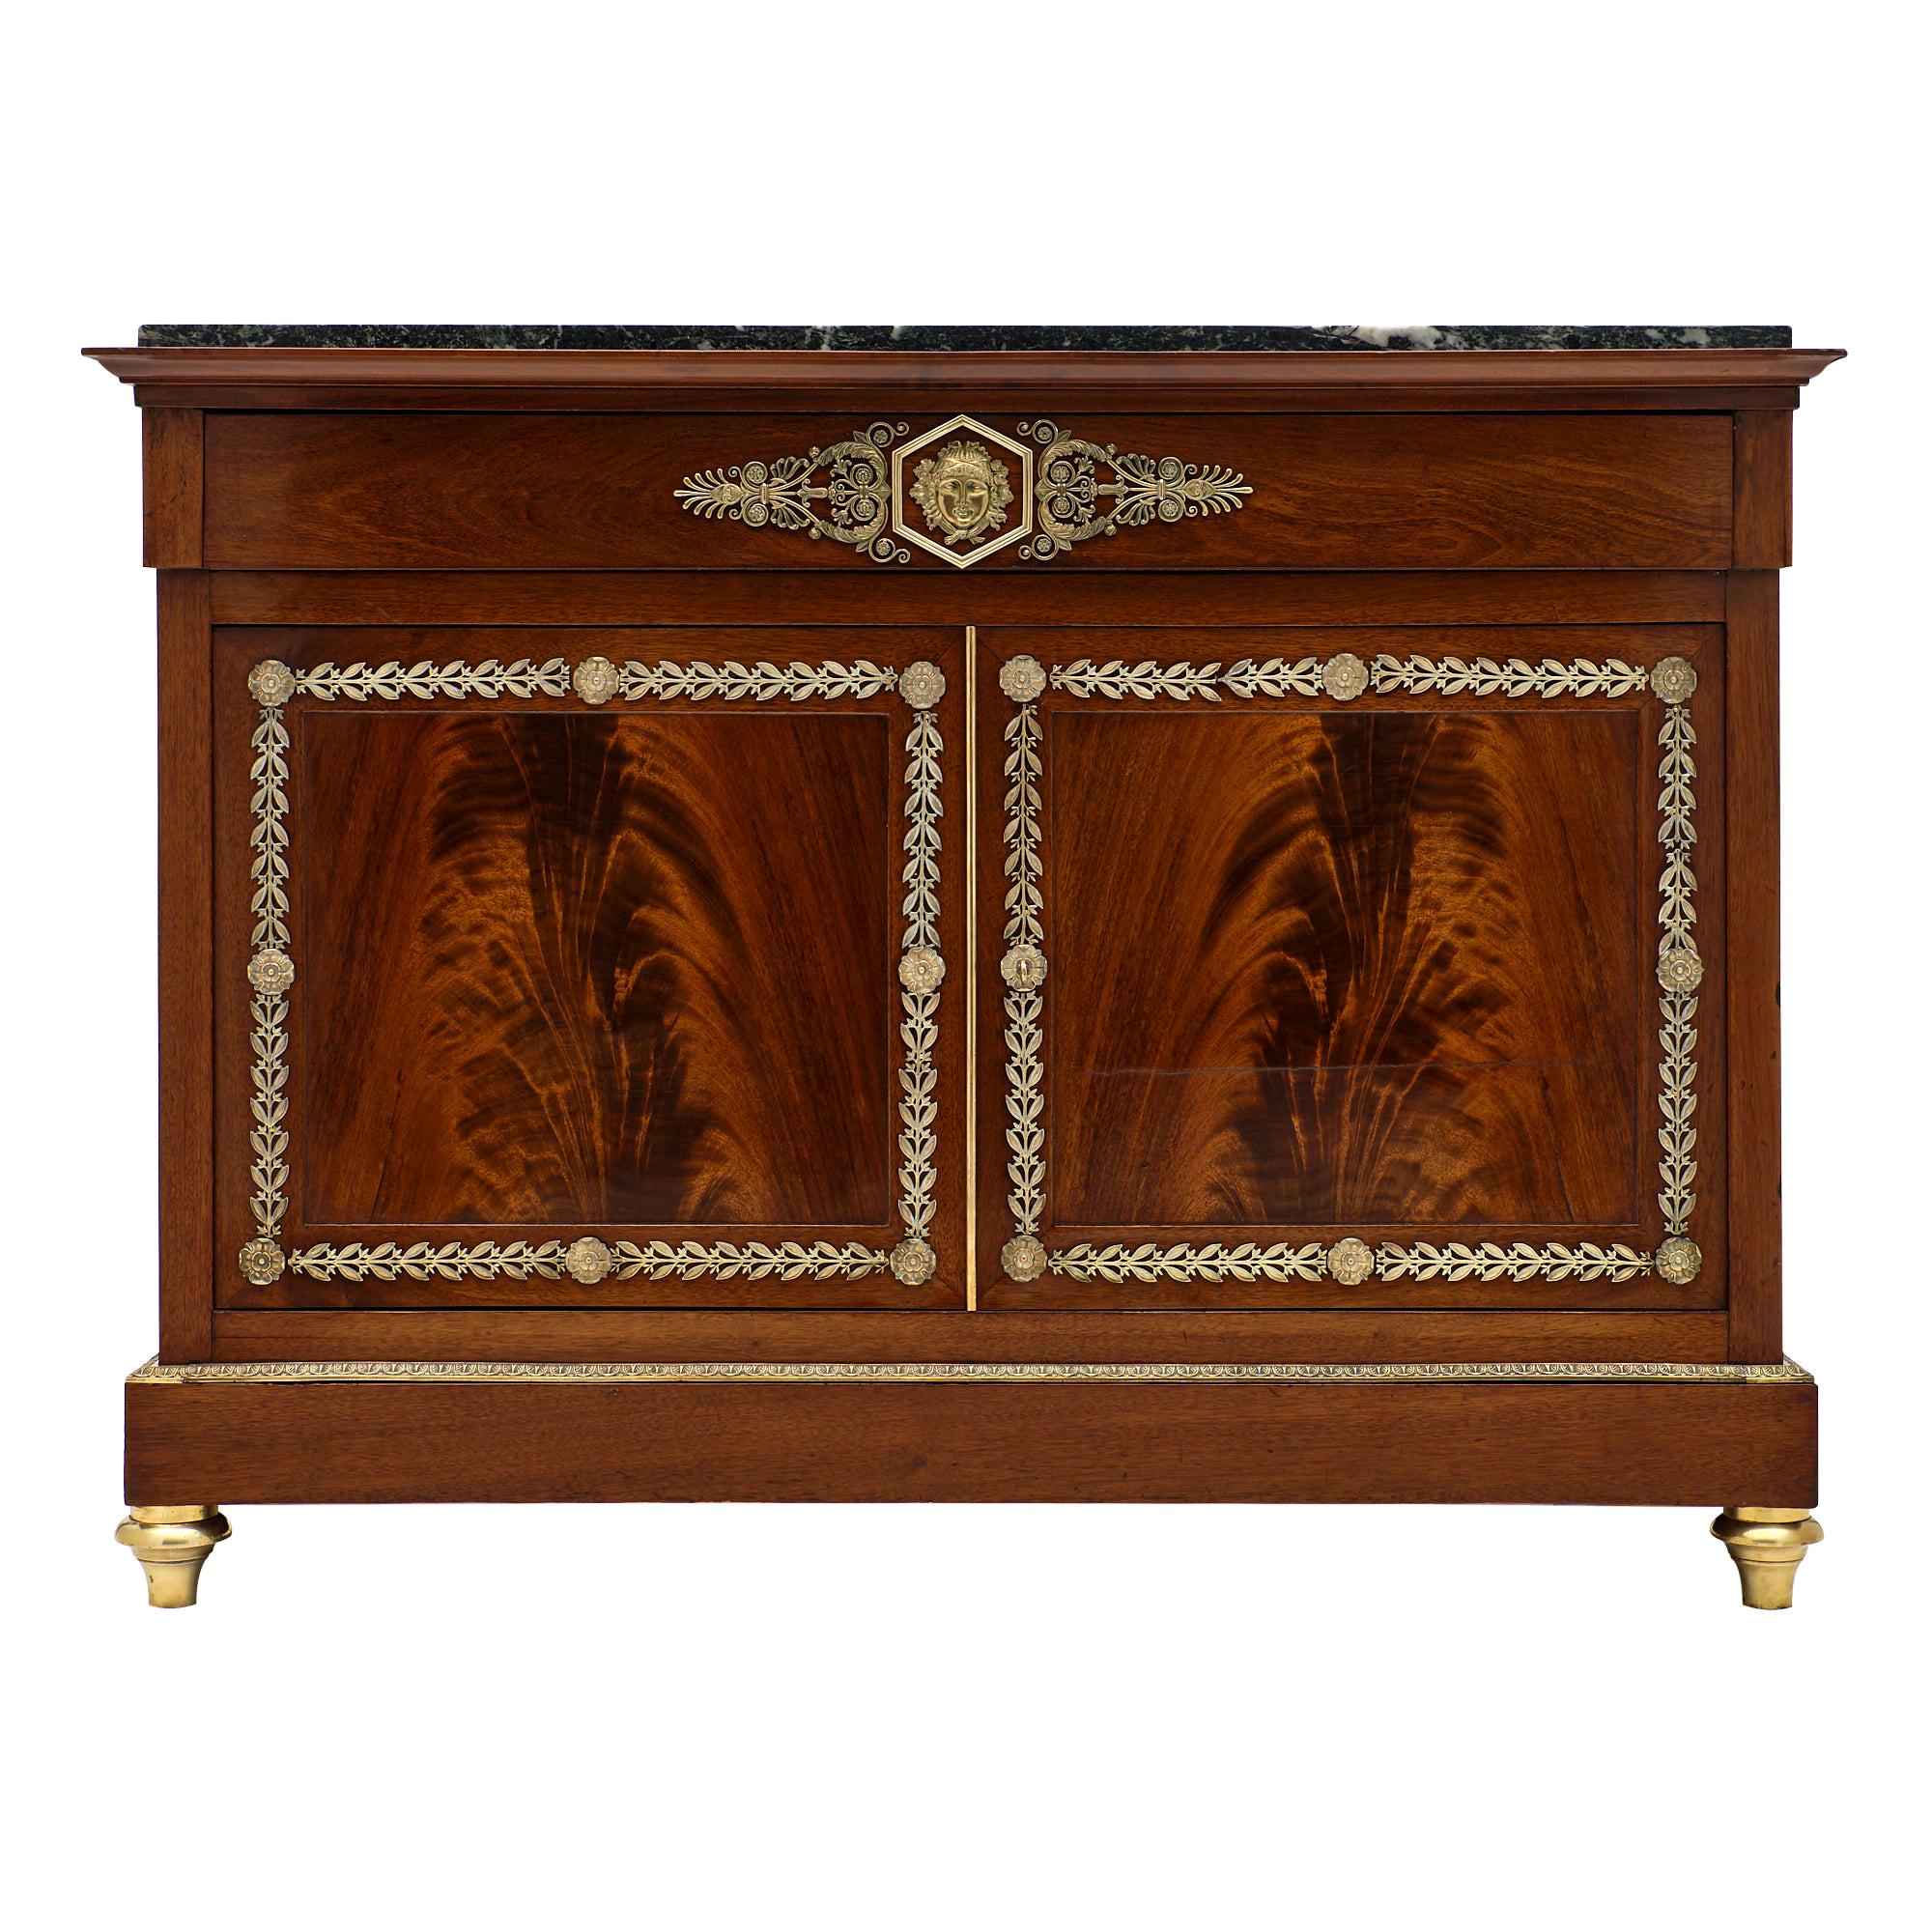 French Directoire Buffet in the Manner of Jacob-Desmalter